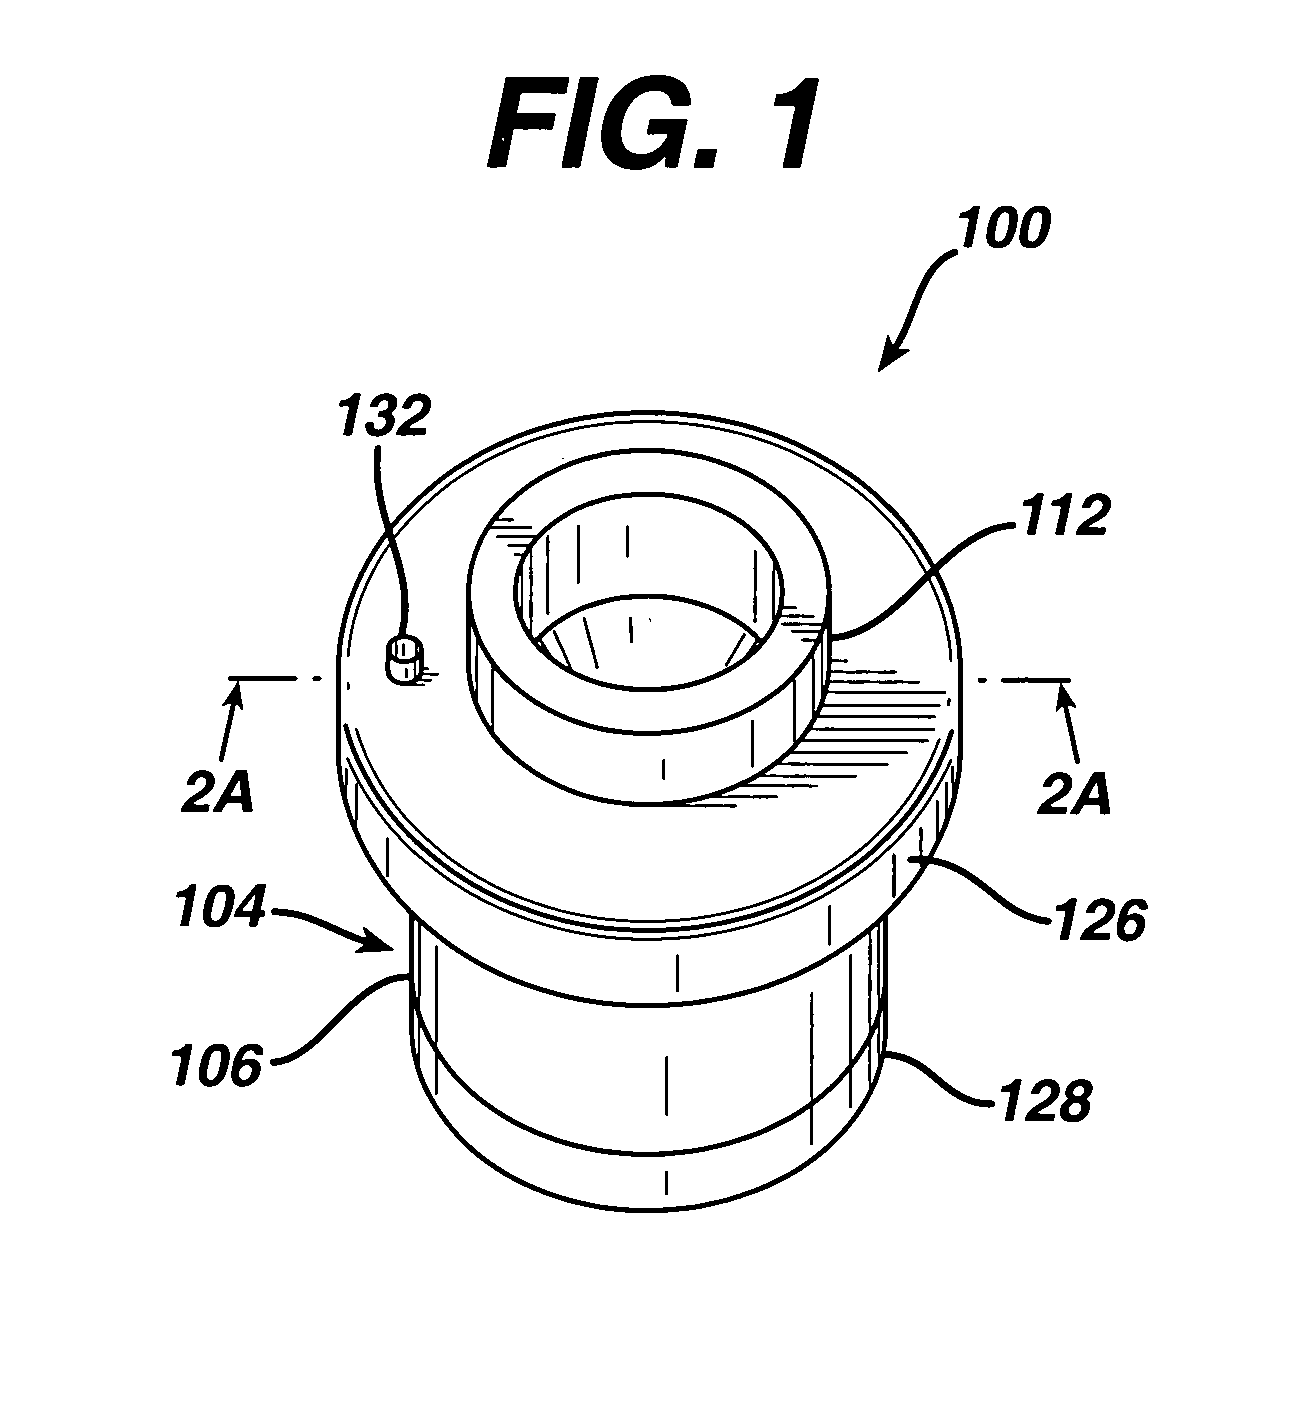 Device for providing intracardiac access in an open chest